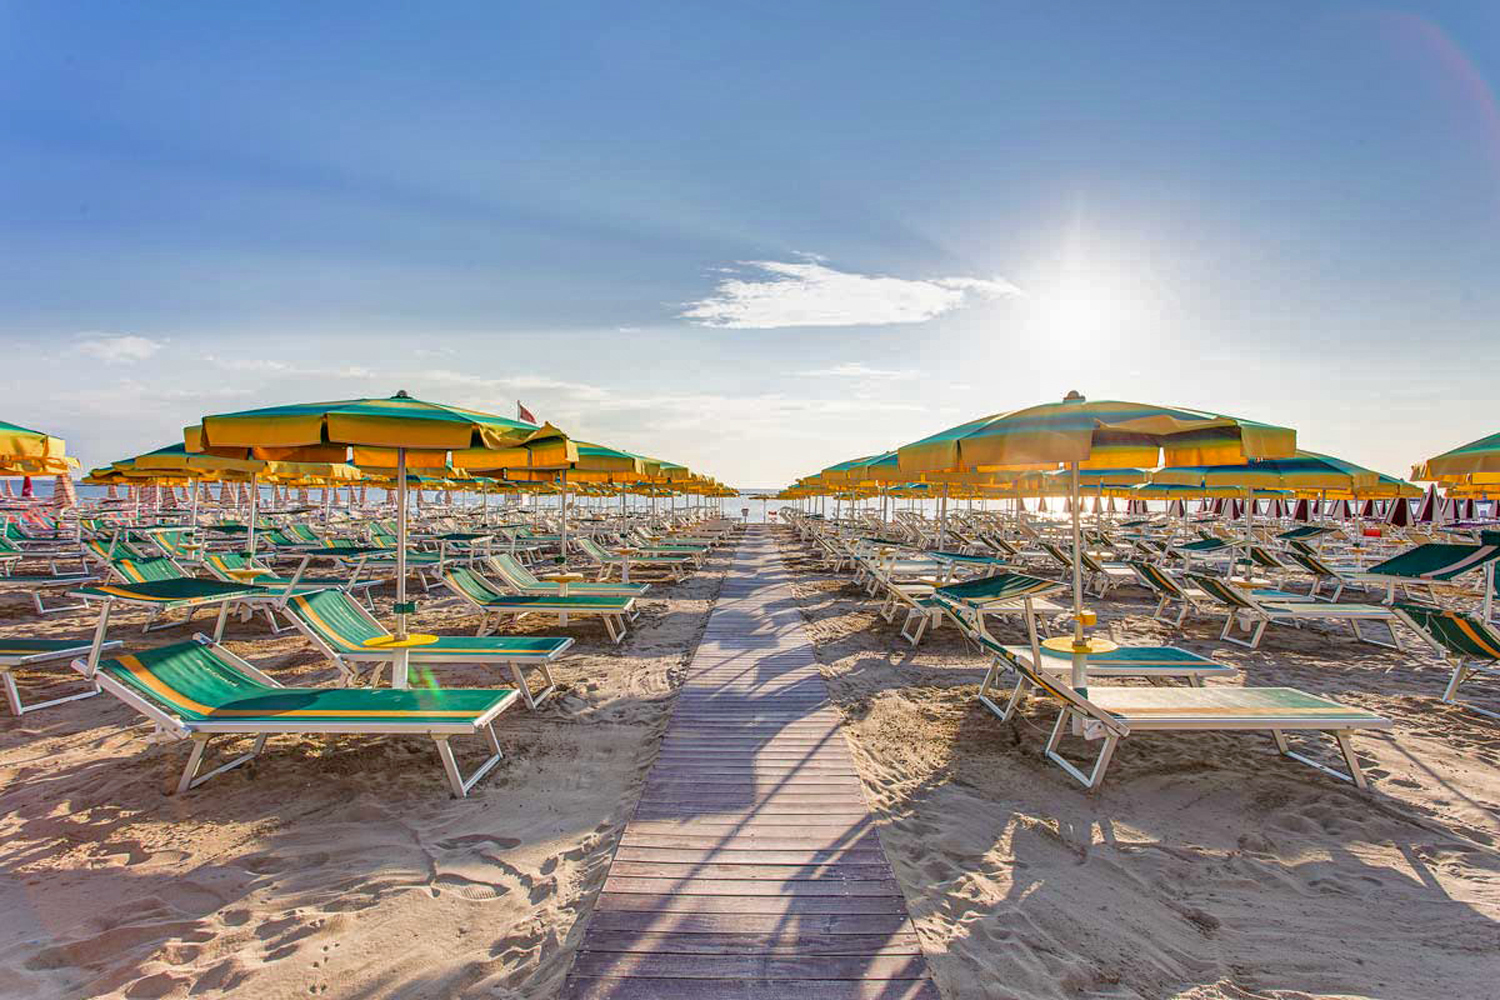 Beaches of Cesenatico | Photo taken from www.hotelcrocedelsud.it